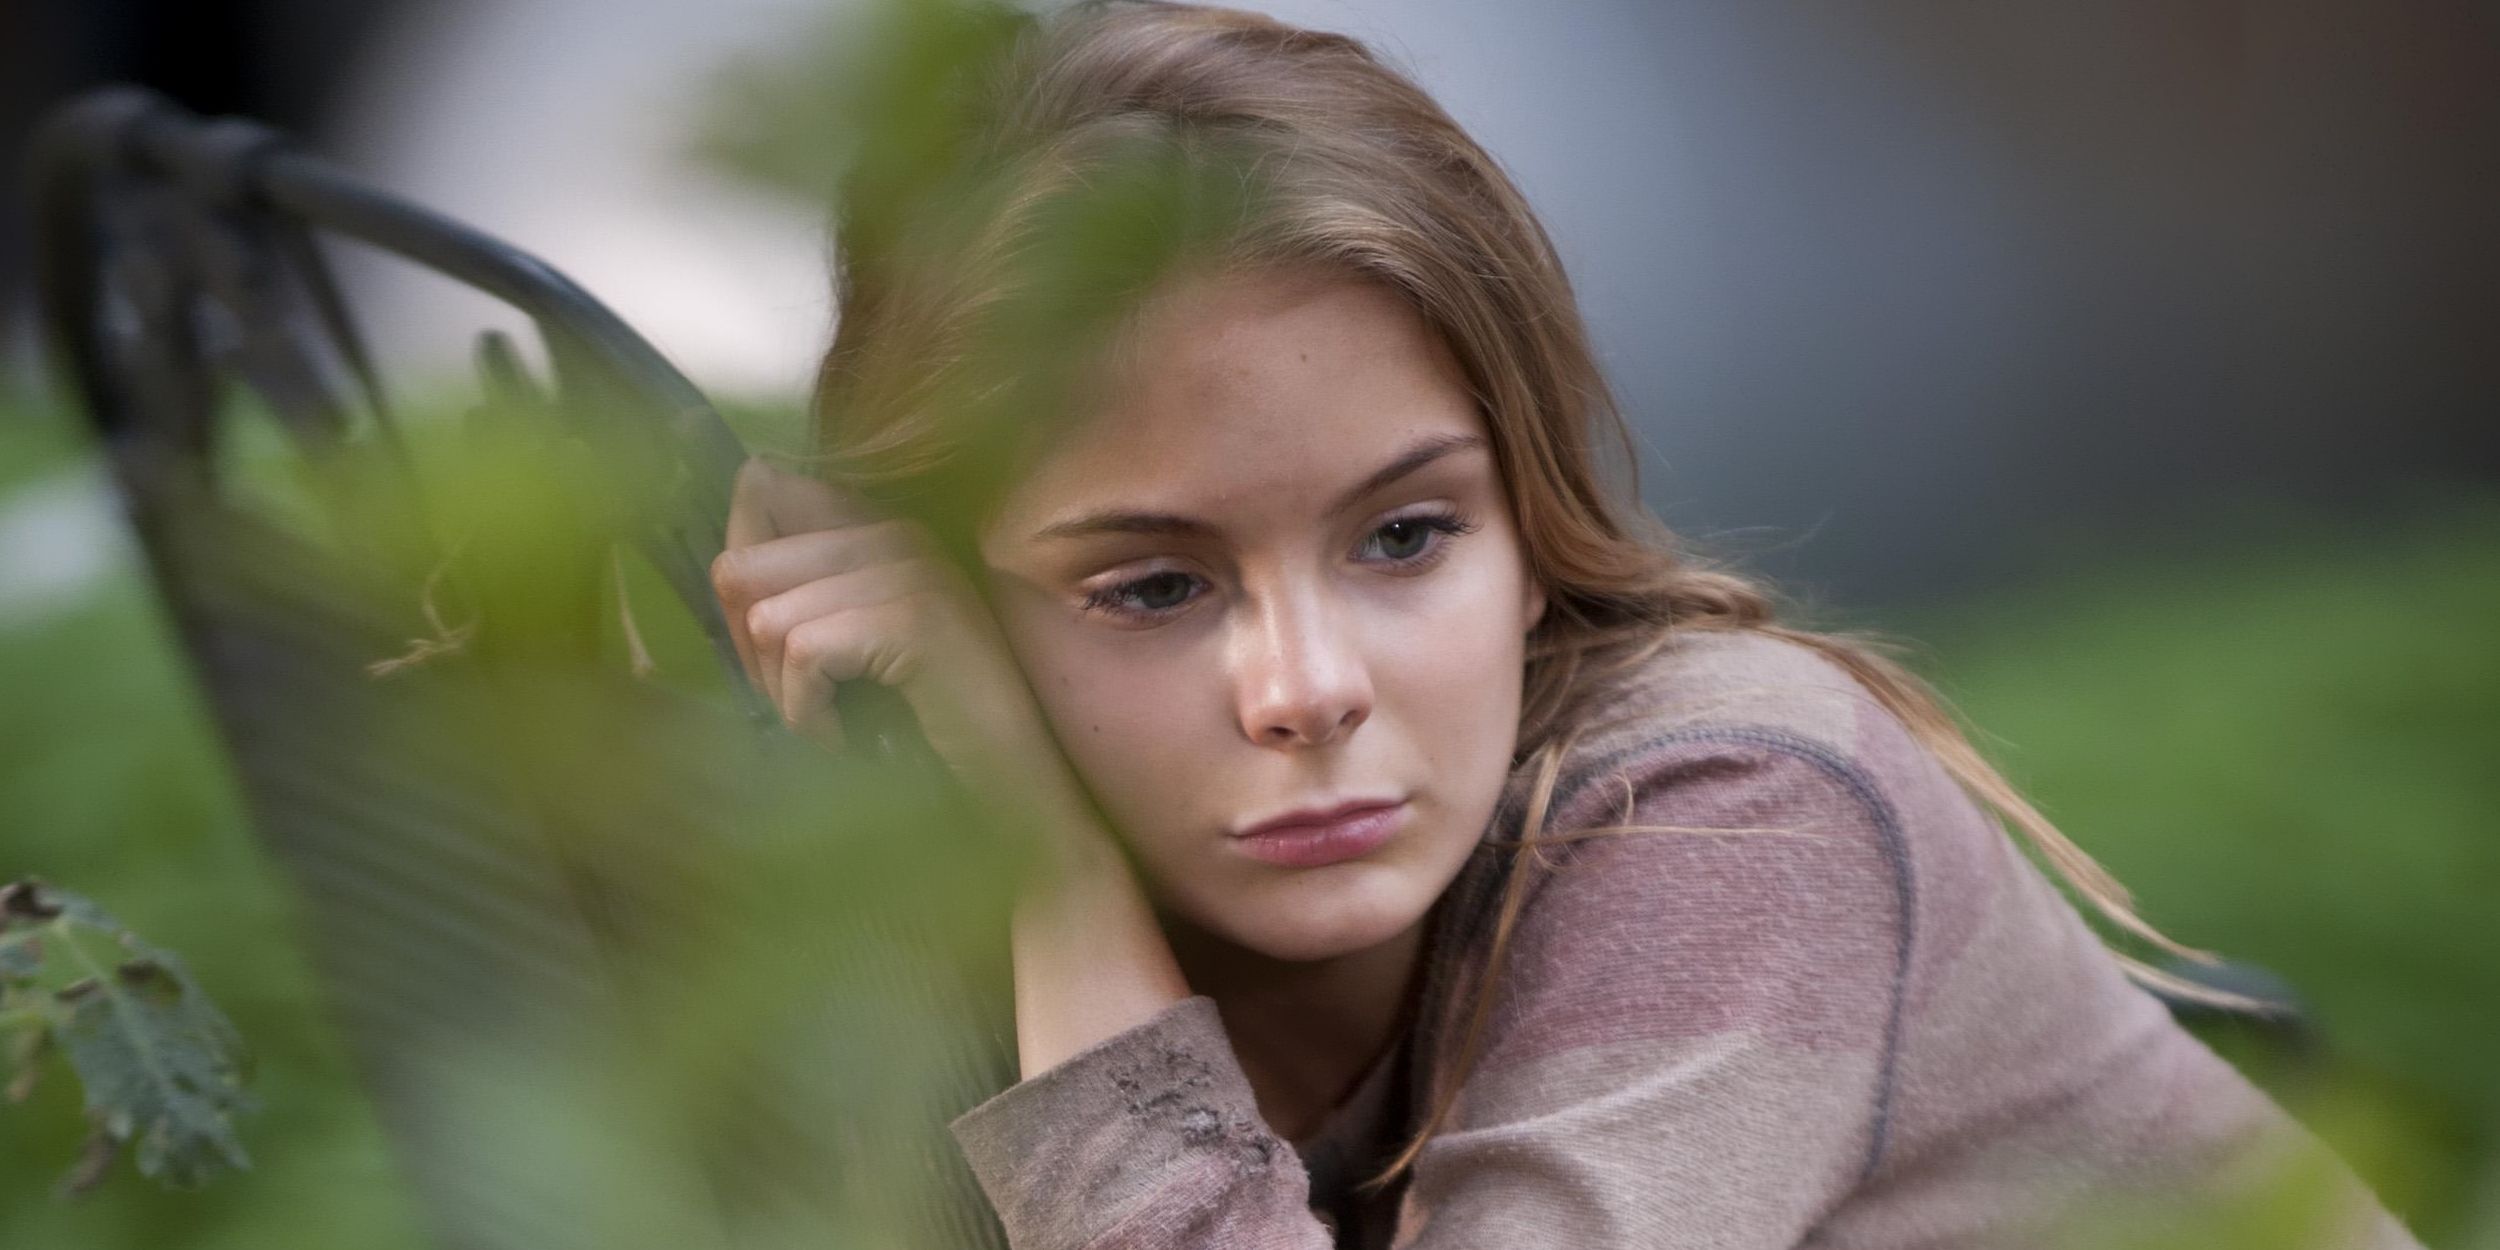 Lizzie Samuels from The Walking Dead leaning against a weapon, looking sad.